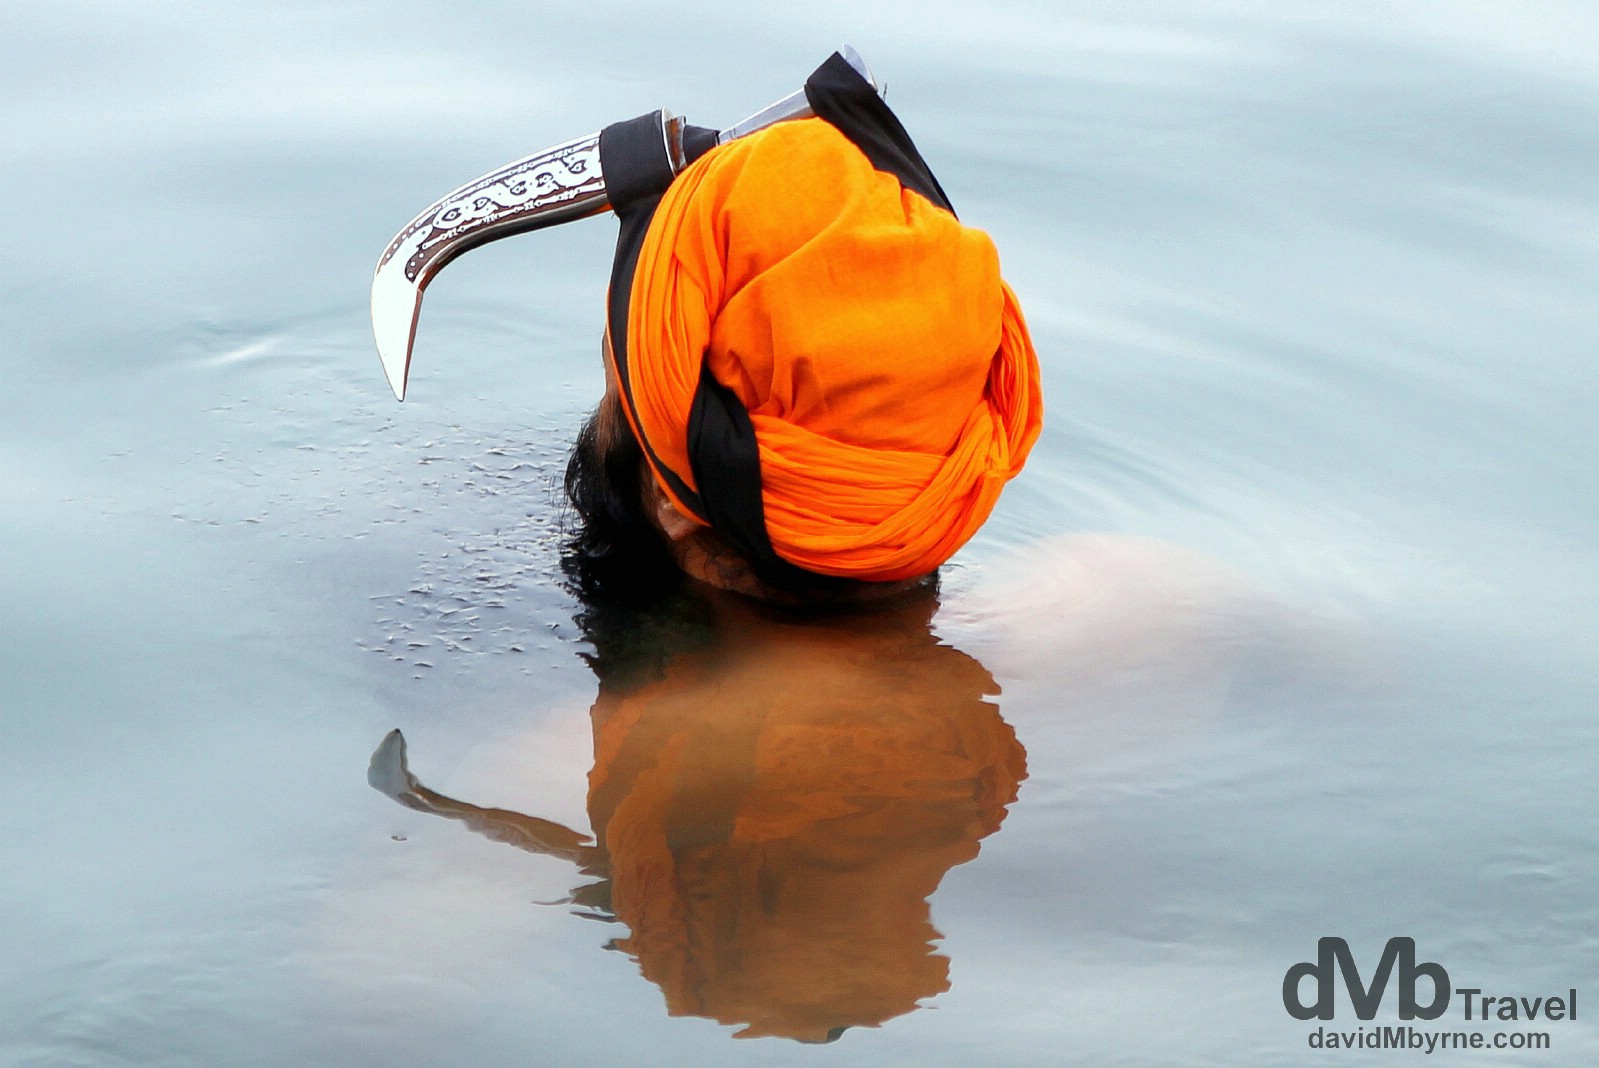 A Sikh devotee in the Amrit Sarovar (Pool of Nectar) in the Golden Temple complex, Amritsar, India. October 9th 2012.